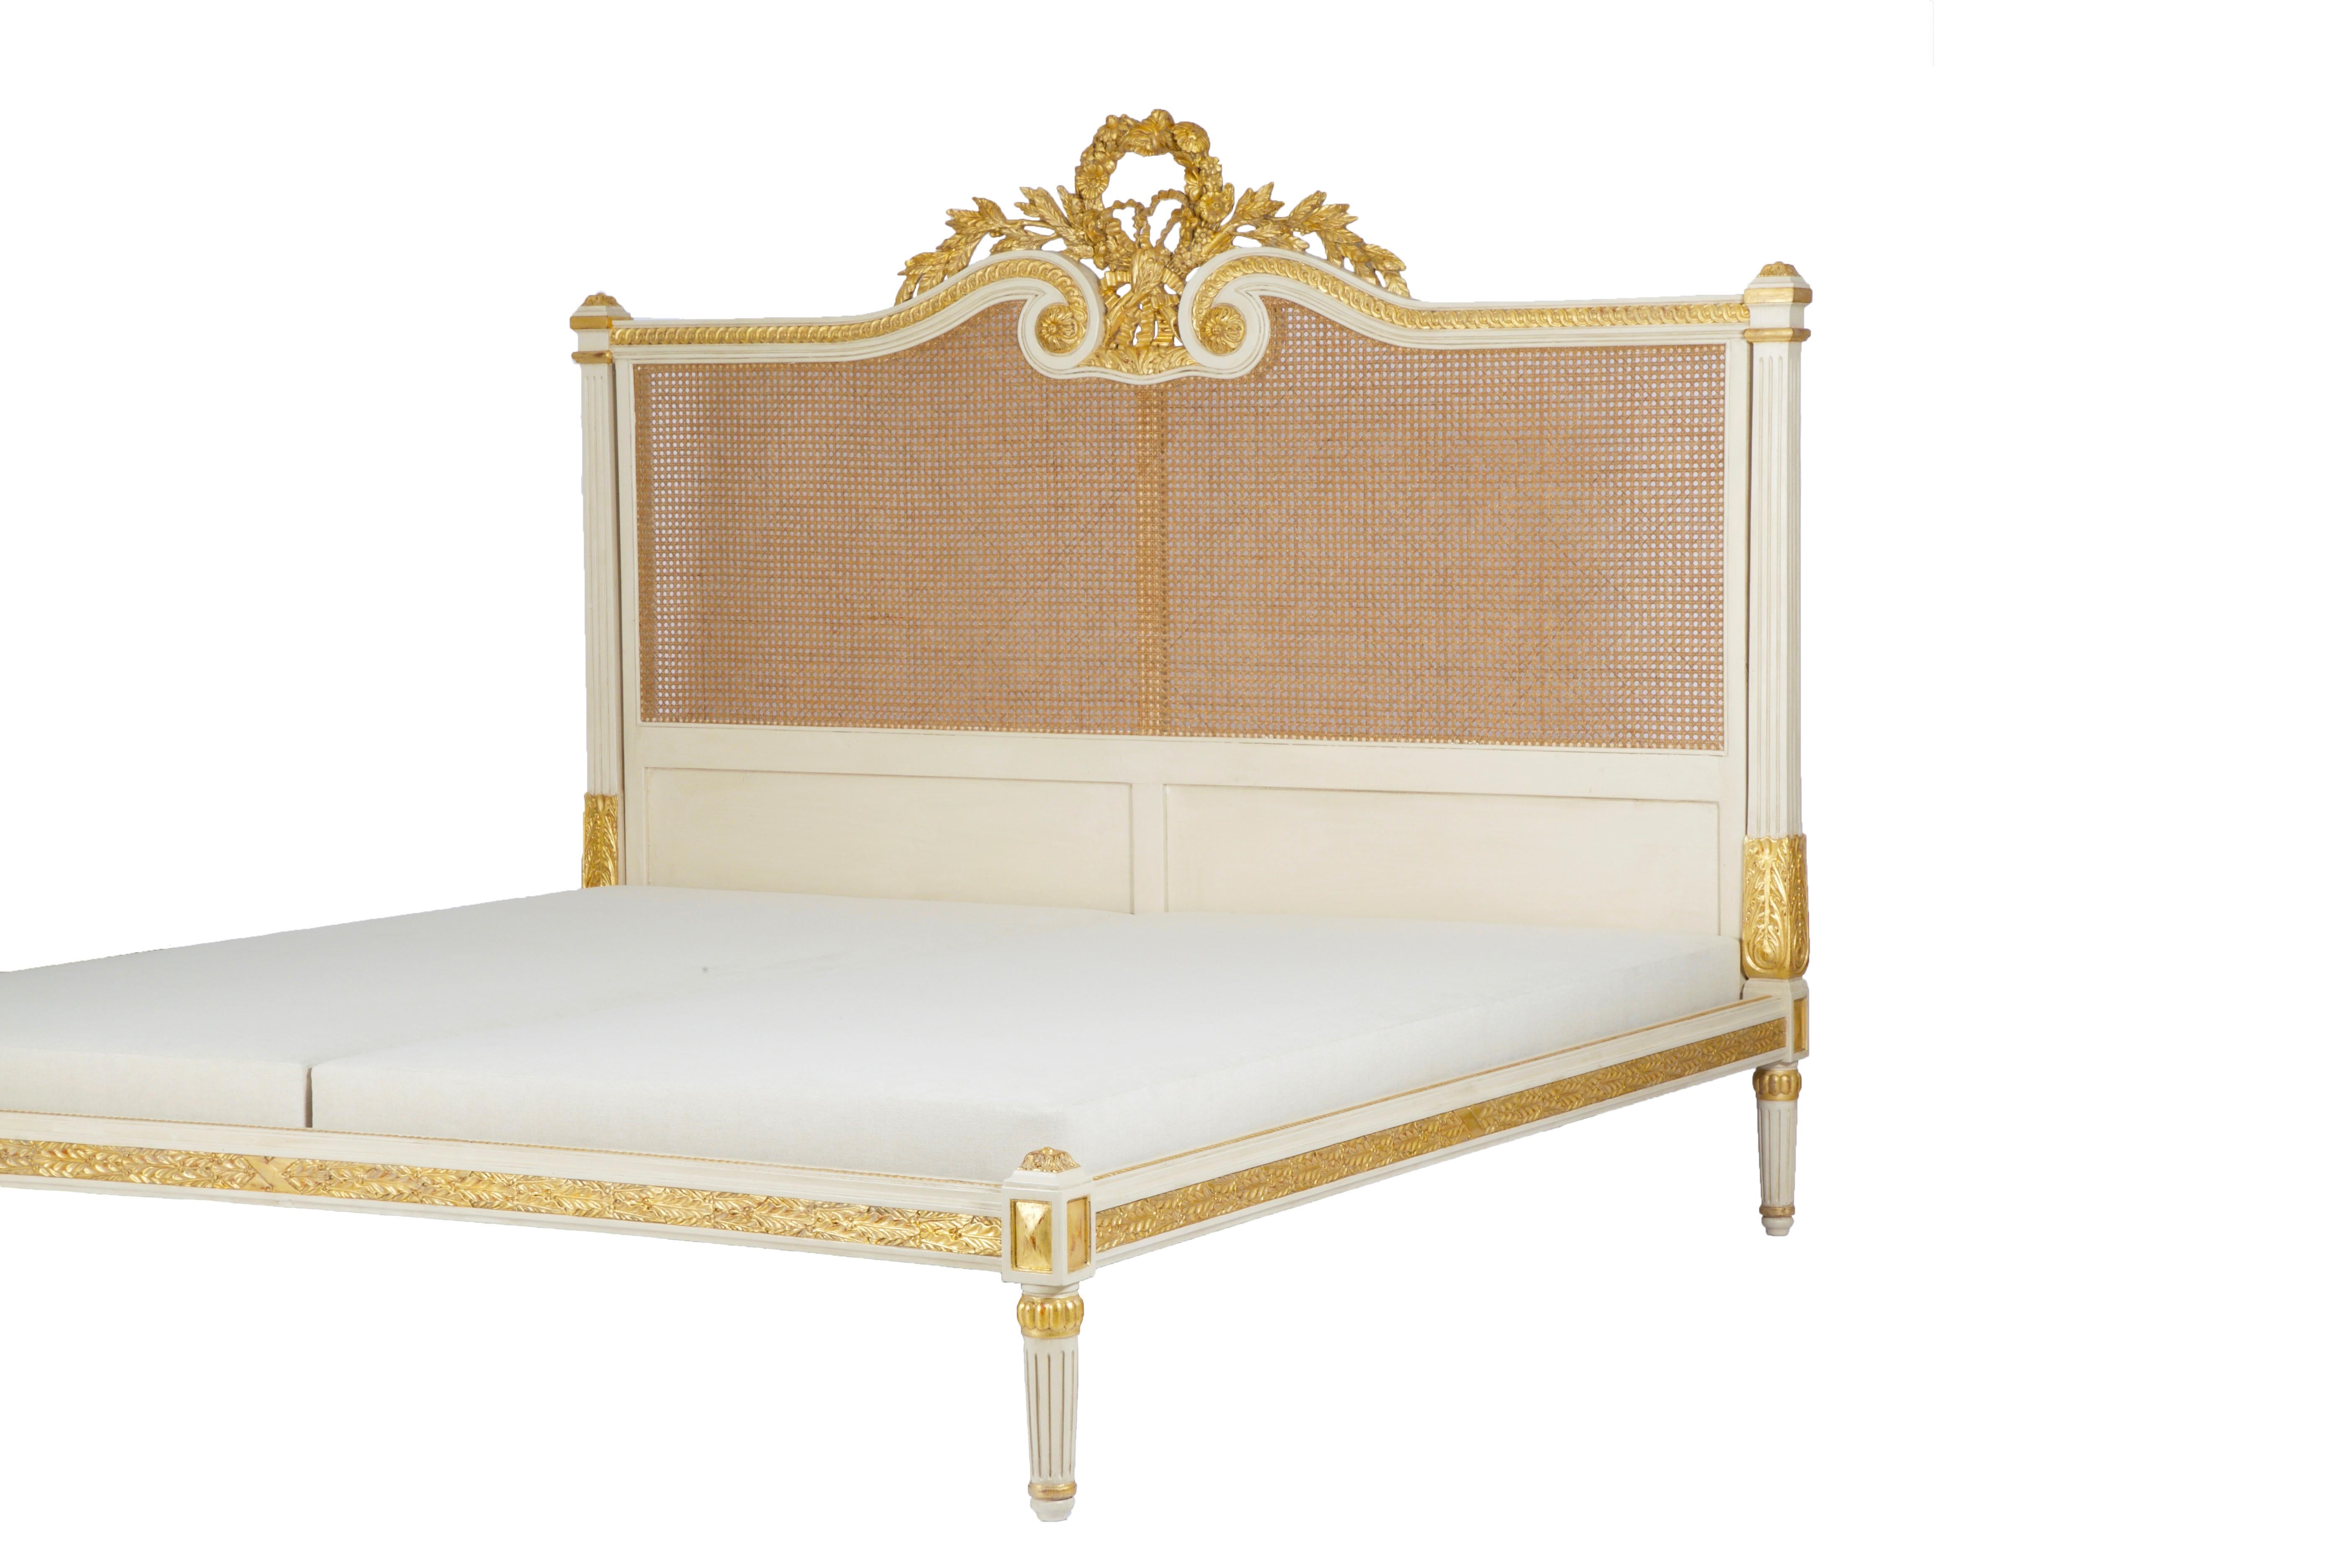 The Rosace bed is an elegant example of the French LXVI style, with its classic columns and restrained ornamentation the bedstead stands tall and exudes a nobel confidence. The apex of the headboard has a meticulously carved rosace which is flanked